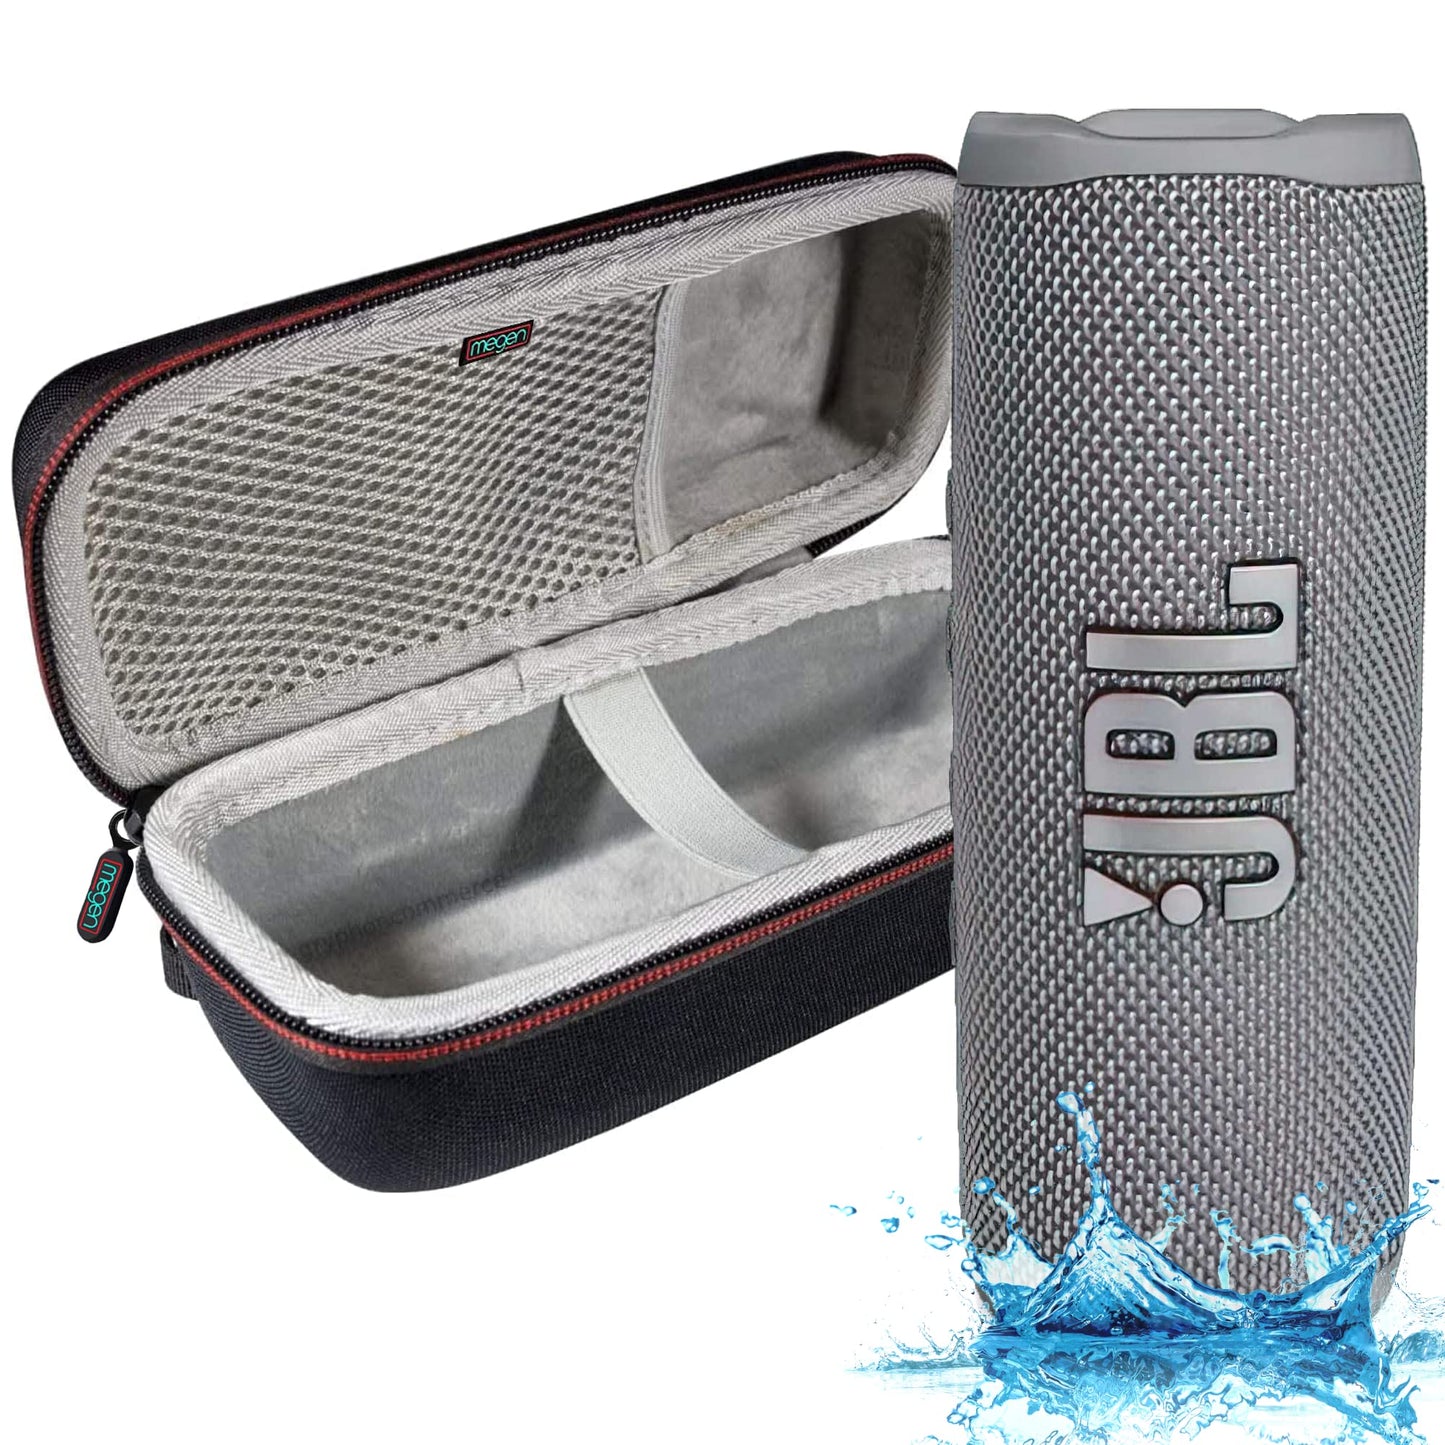 JBL Flip 6 - Waterproof Portable Bluetooth Speaker, Powerful Sound and deep bass, IPX7 Waterproof, 12 Hours of Playtime with Megen Hardshell Case - Gray